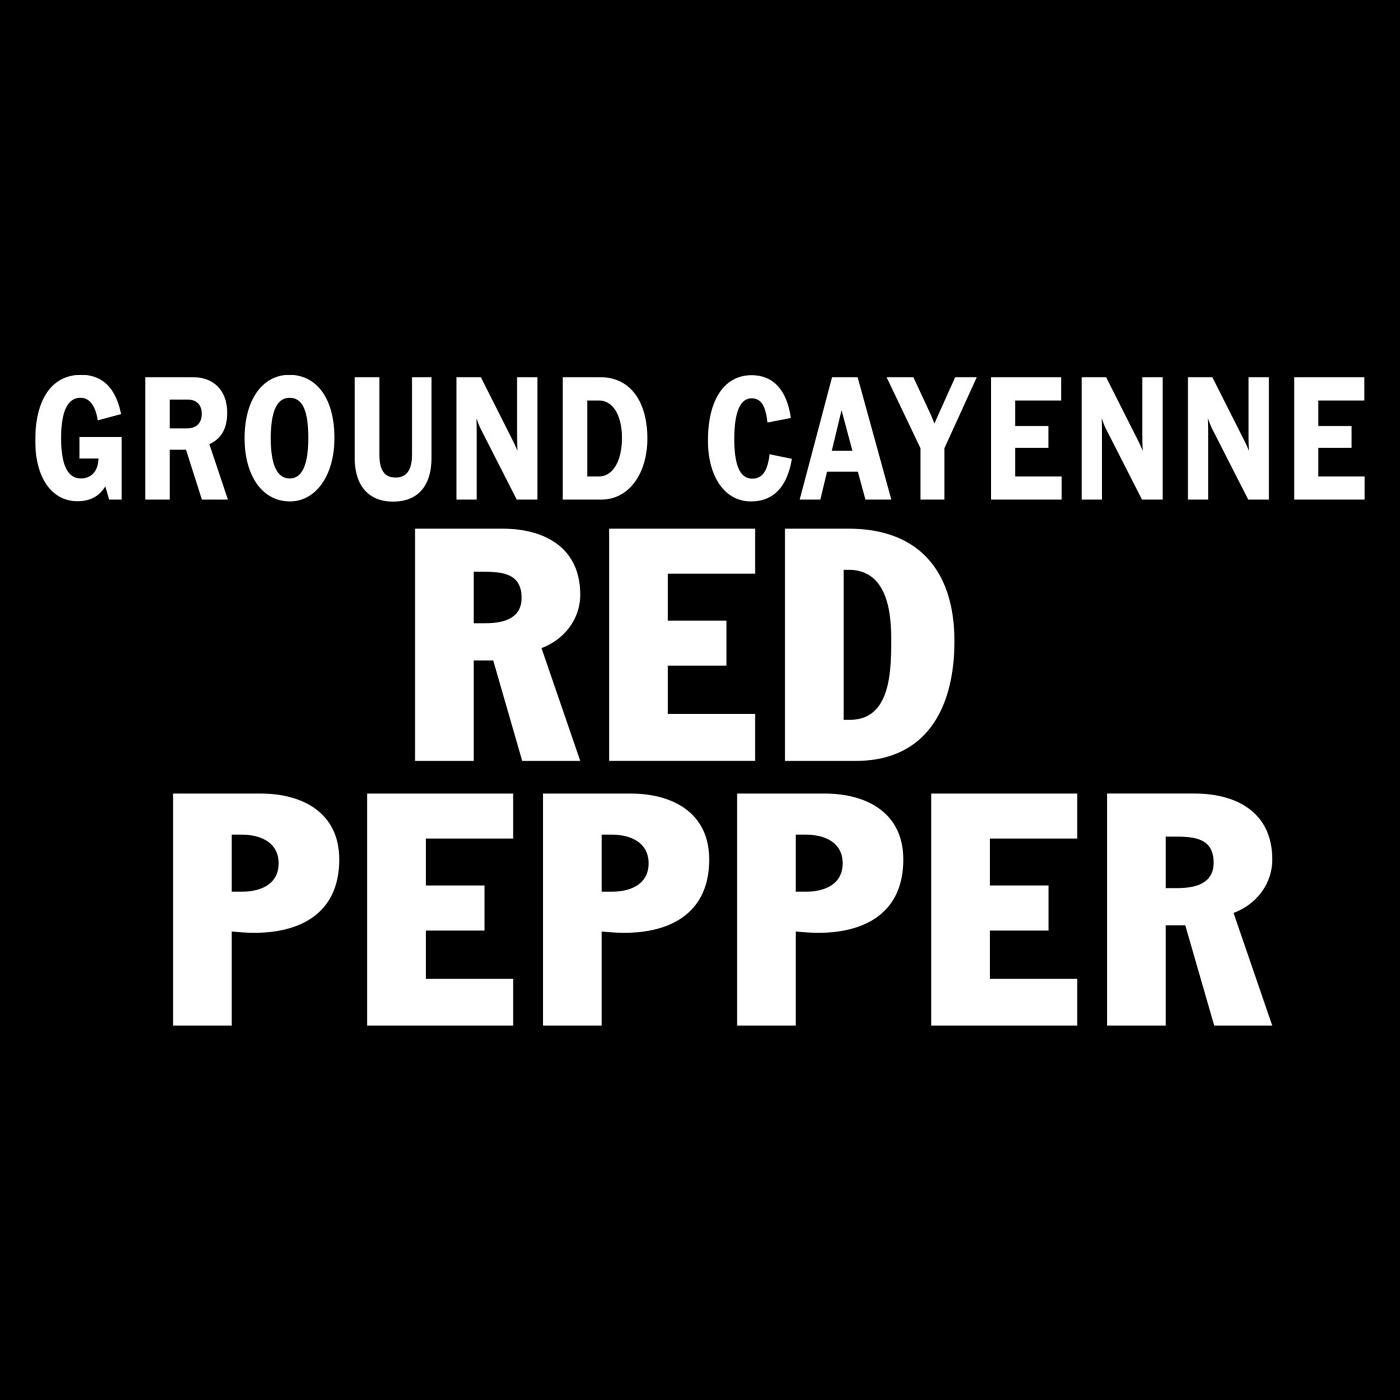 McCormick Ground Cayenne Red Pepper; image 6 of 8